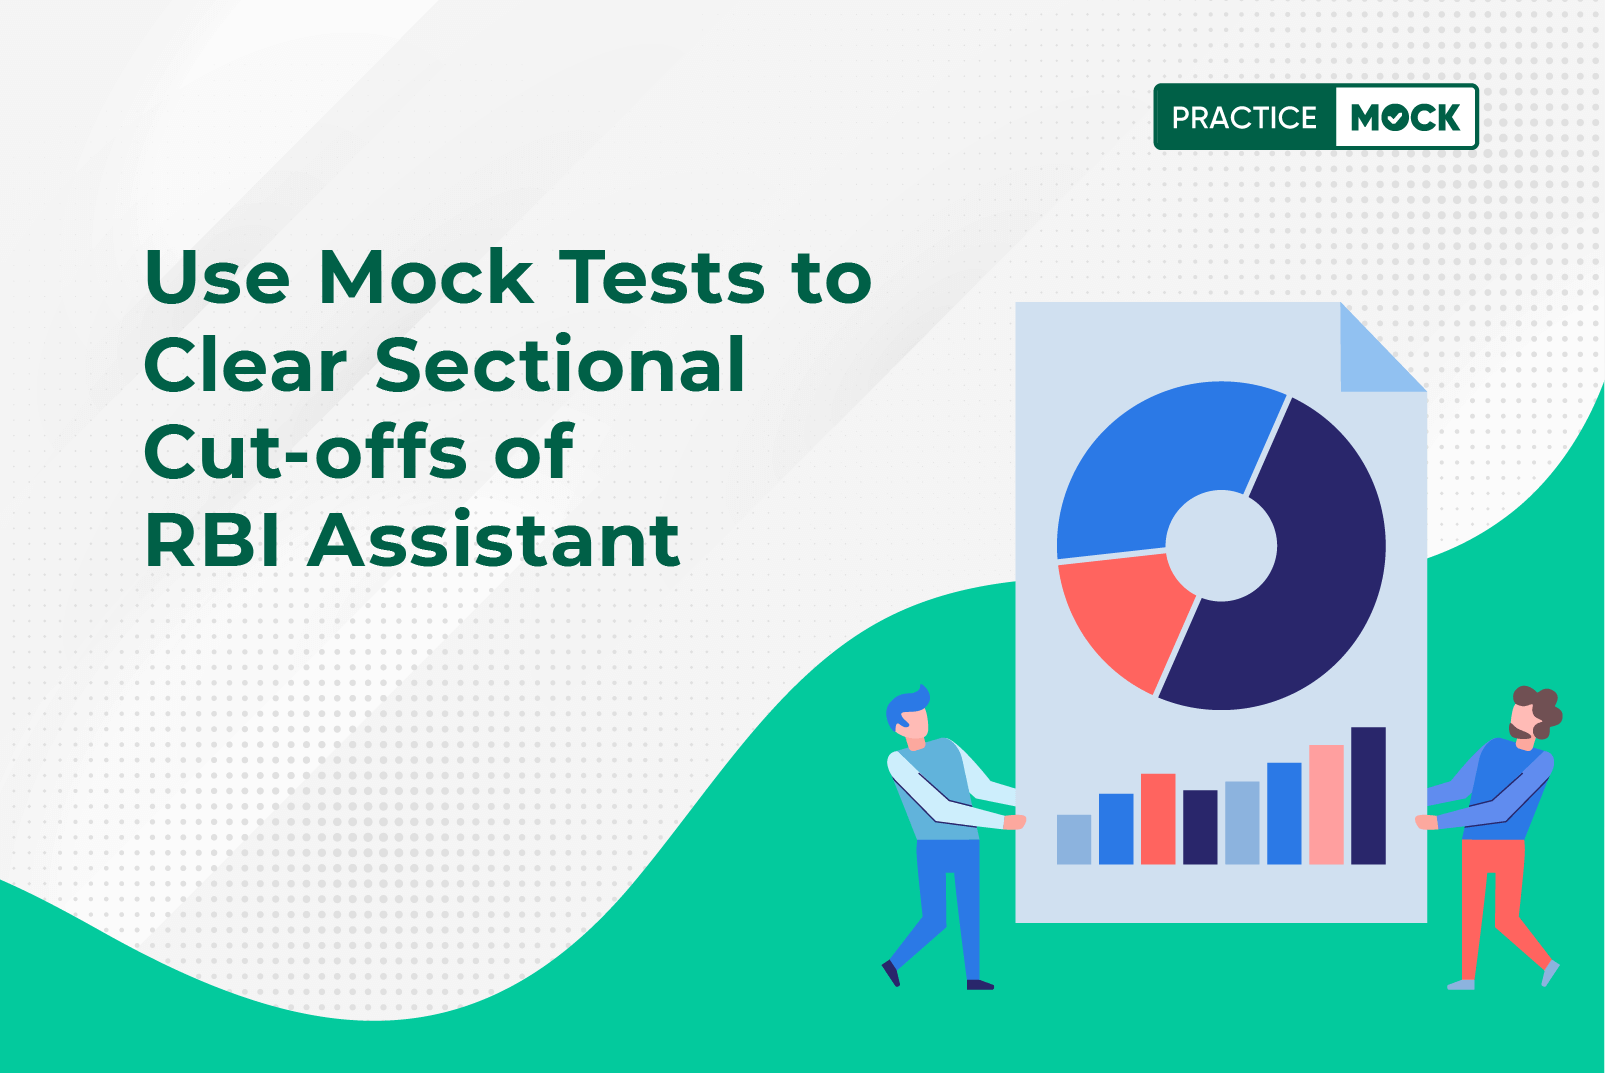 Use Mock Tests to clear Sectional Cut-offs of RBI Assistant (2)